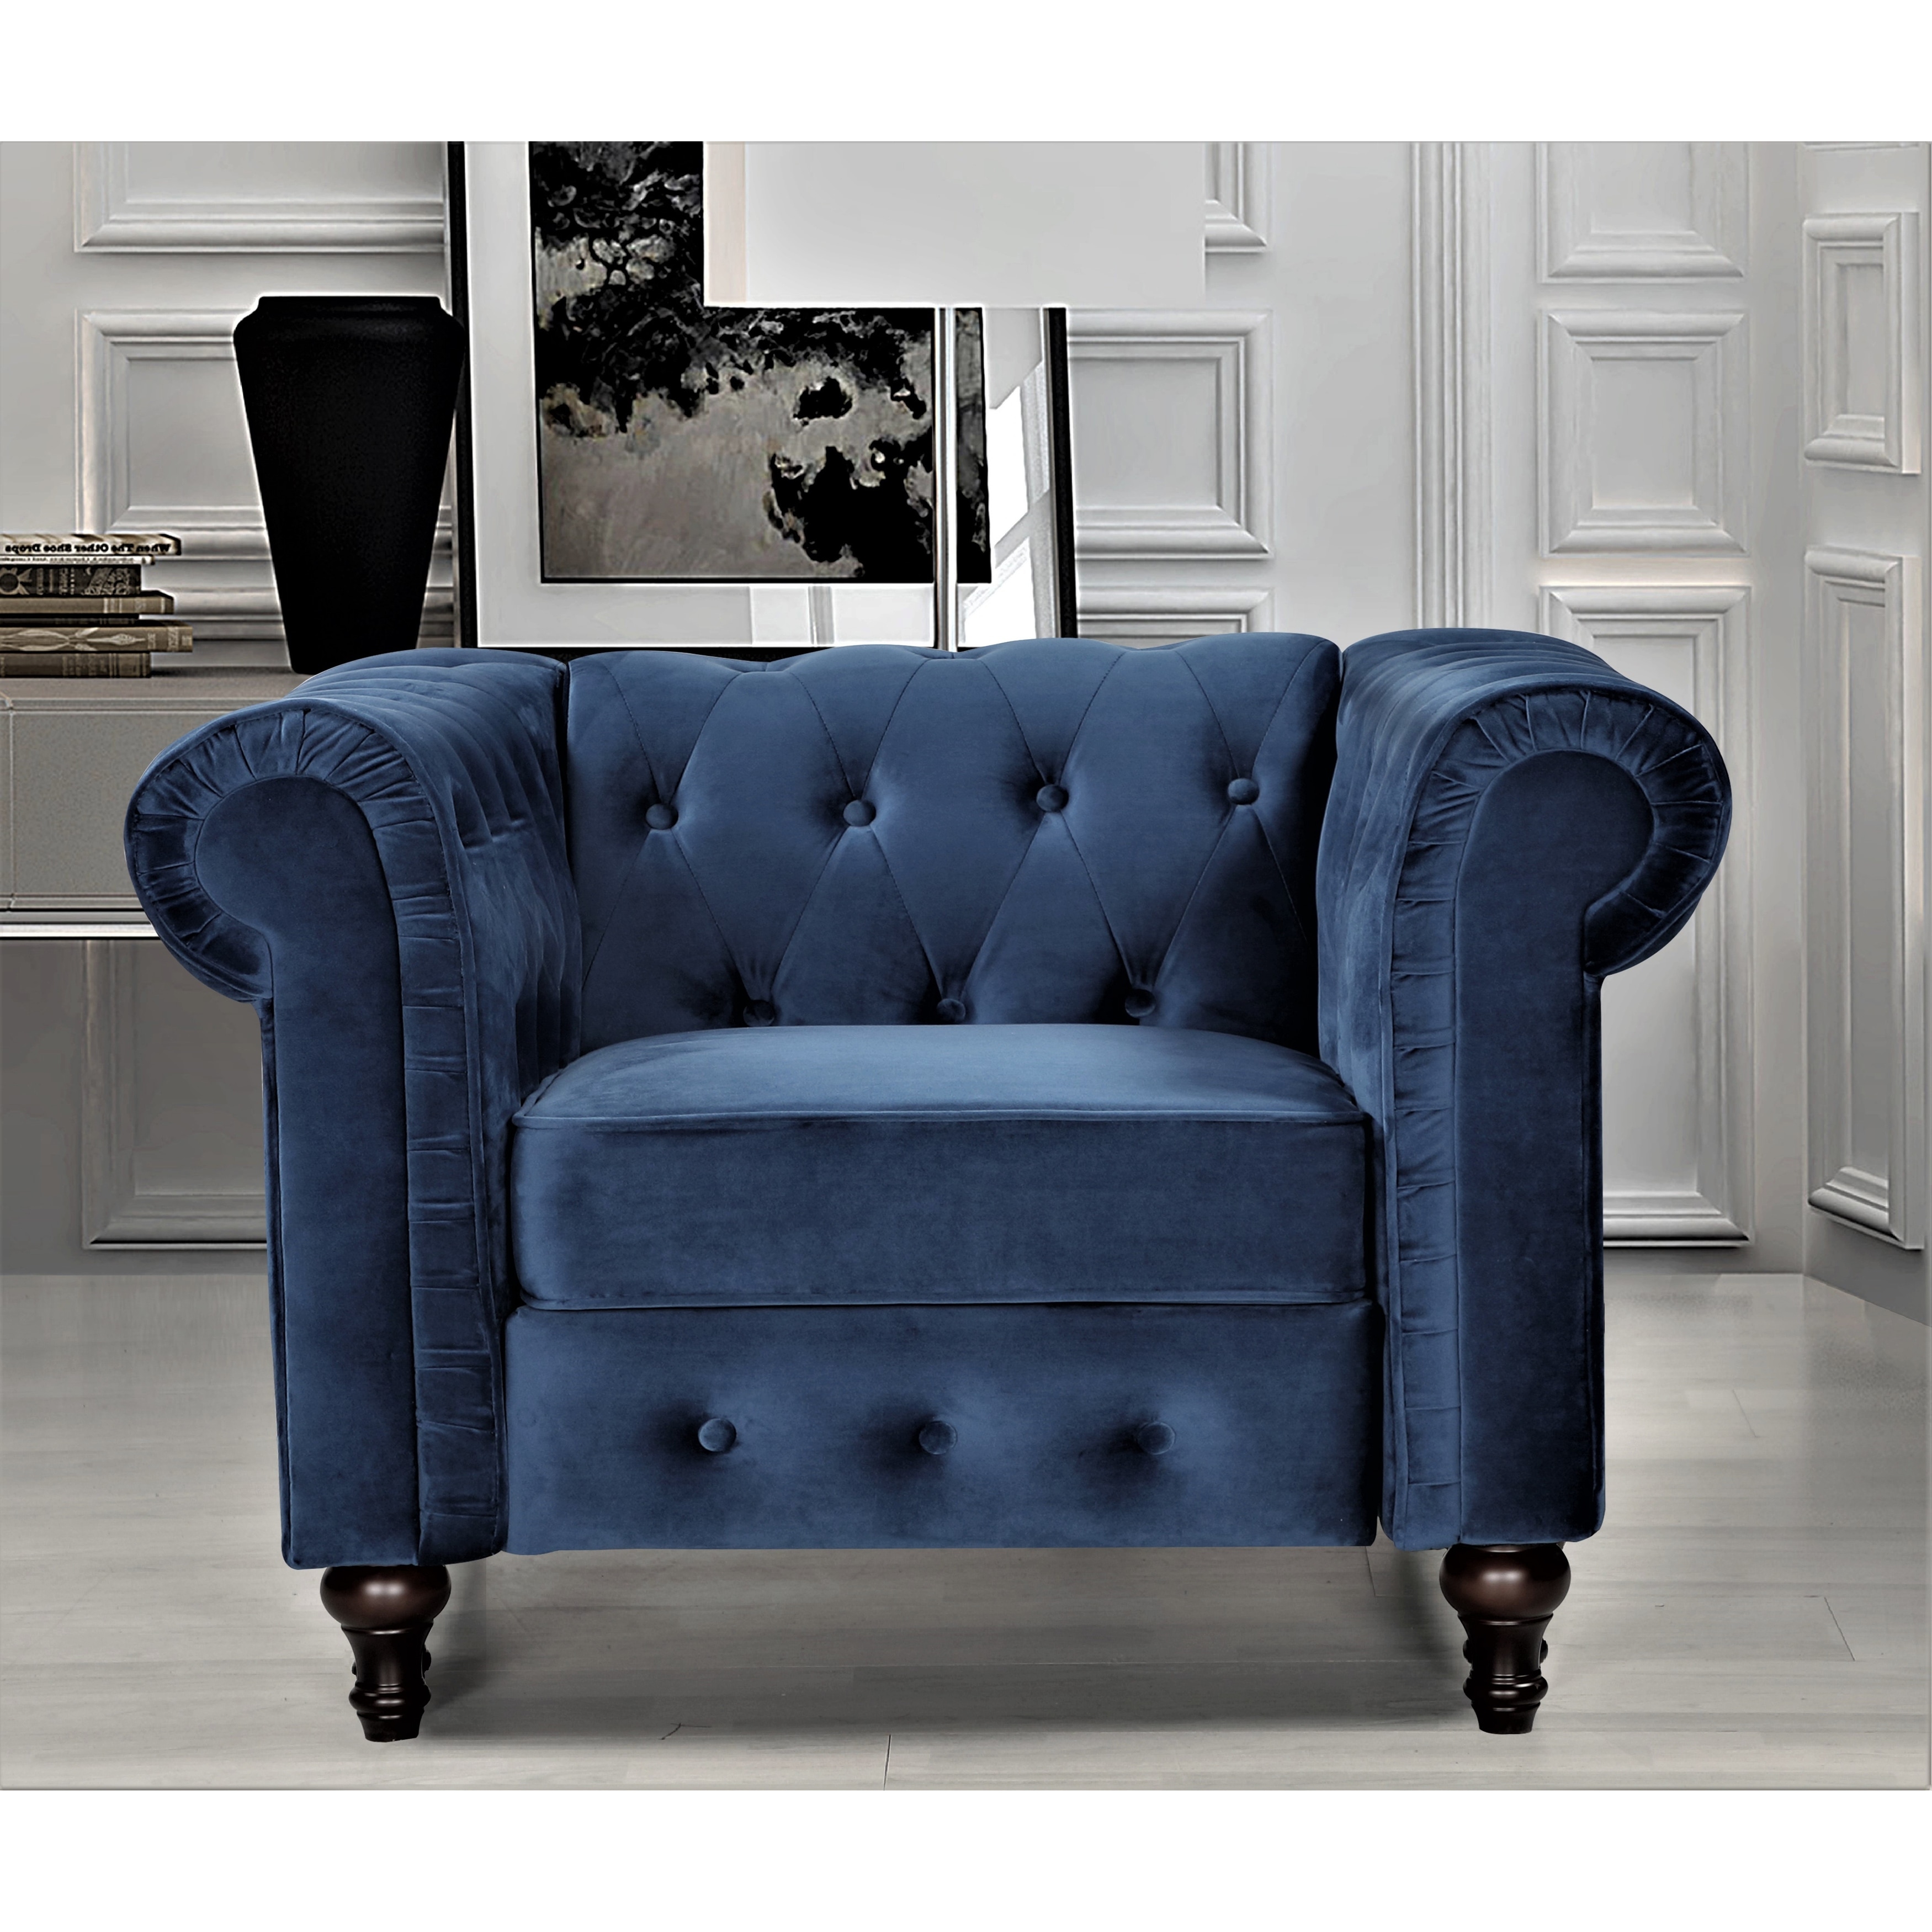 KIT RENOVATION FAUTEUIL CLUB OU CHESTERFIELD